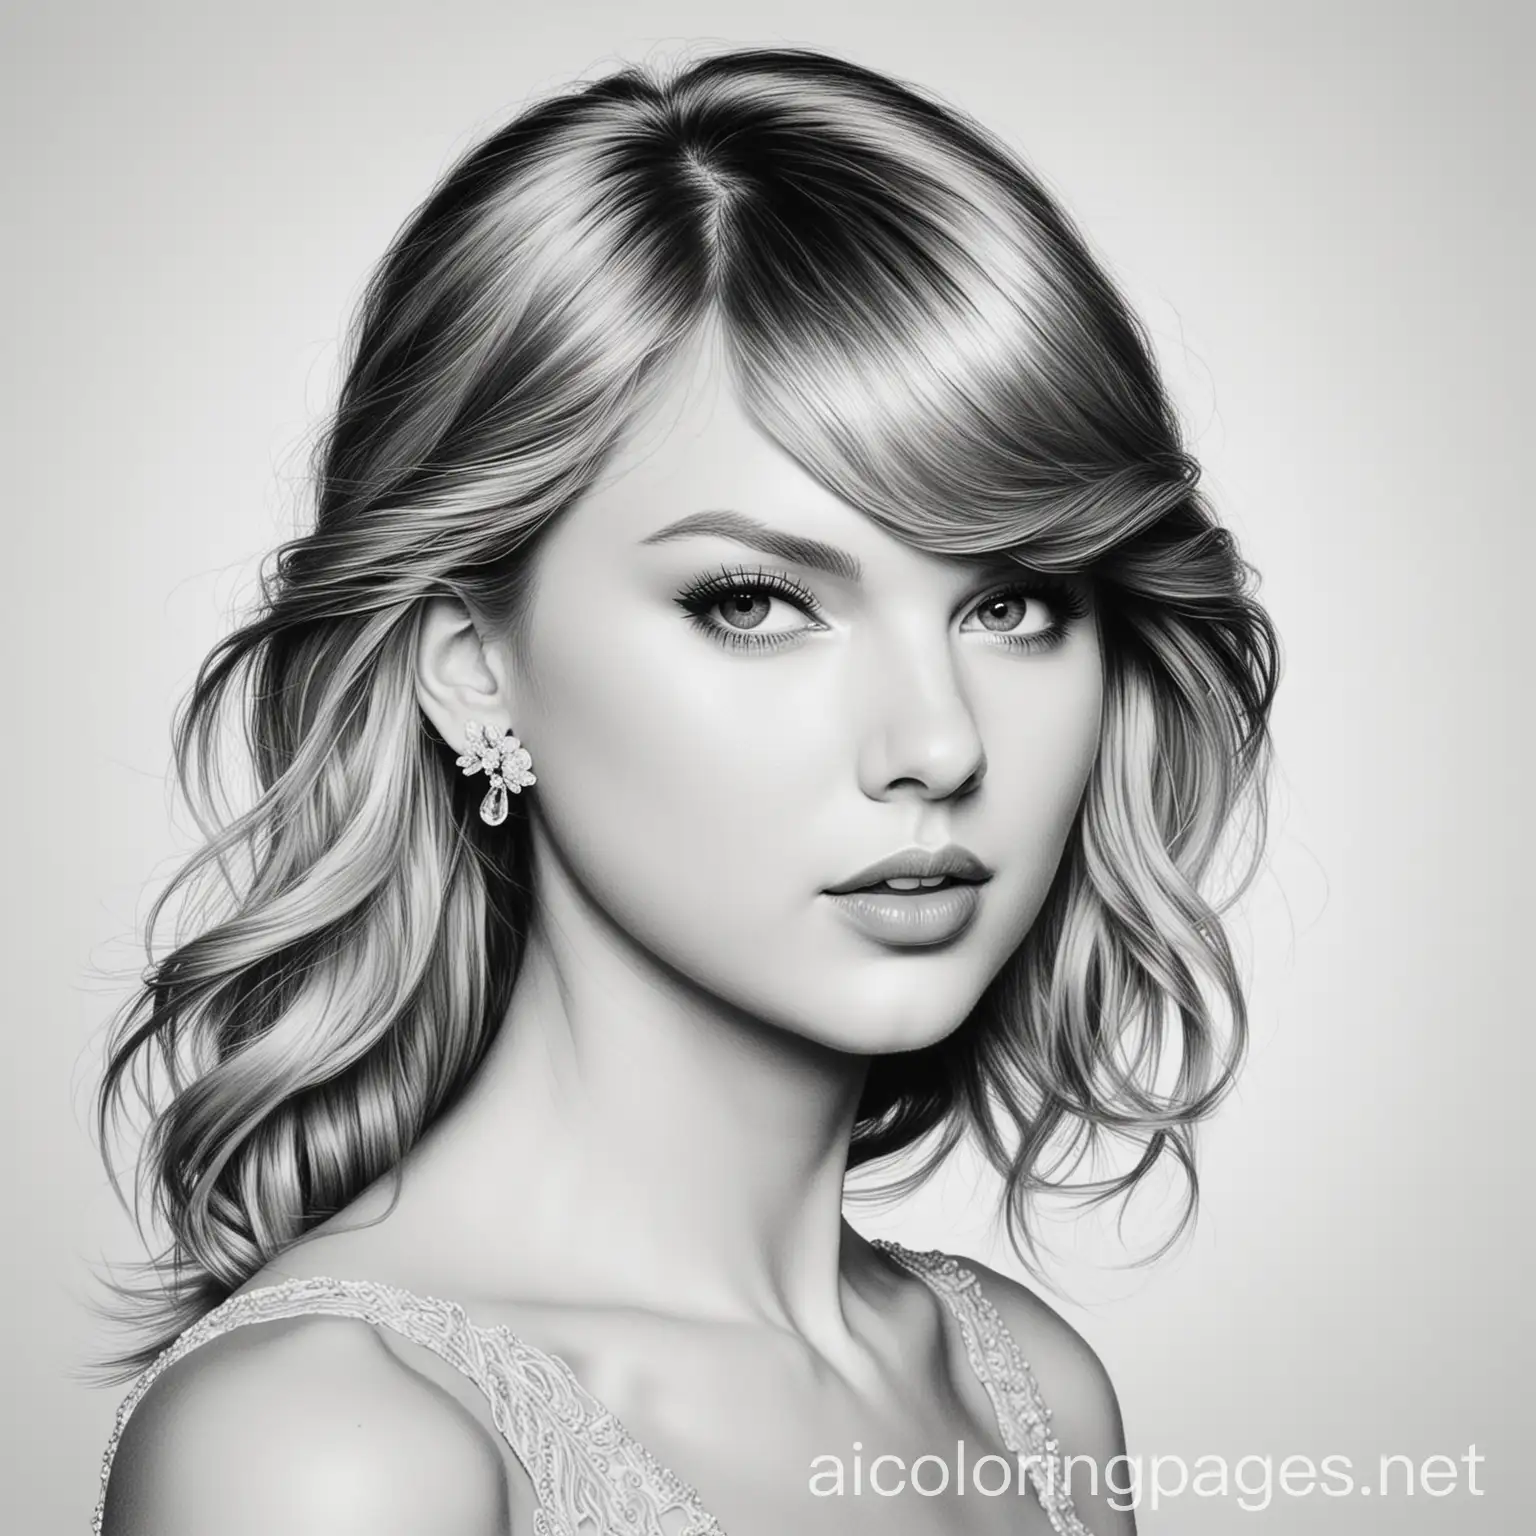 Taylor-Swift-Coloring-Page-Simple-Line-Art-on-White-Background